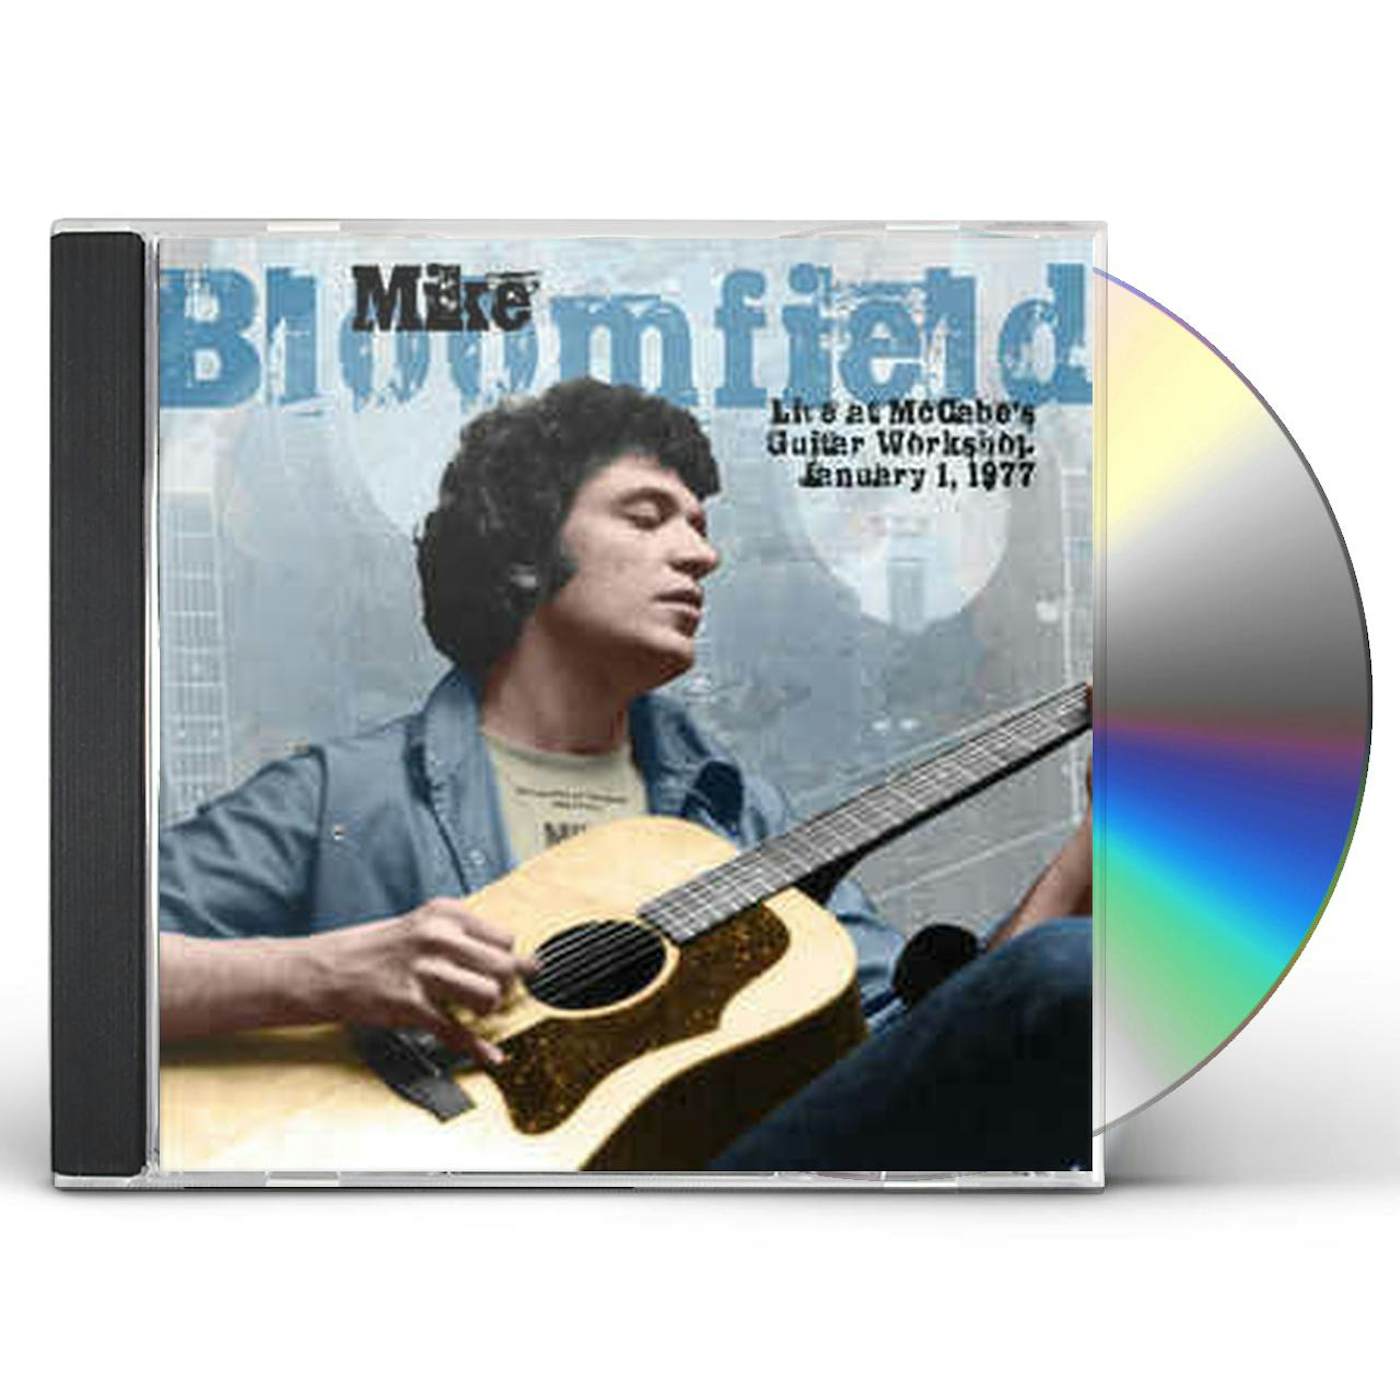 Mike Bloomfield LIVE AT MCCABE'S GUITAR WORKSHOP, JANUARY1, 1977 CD